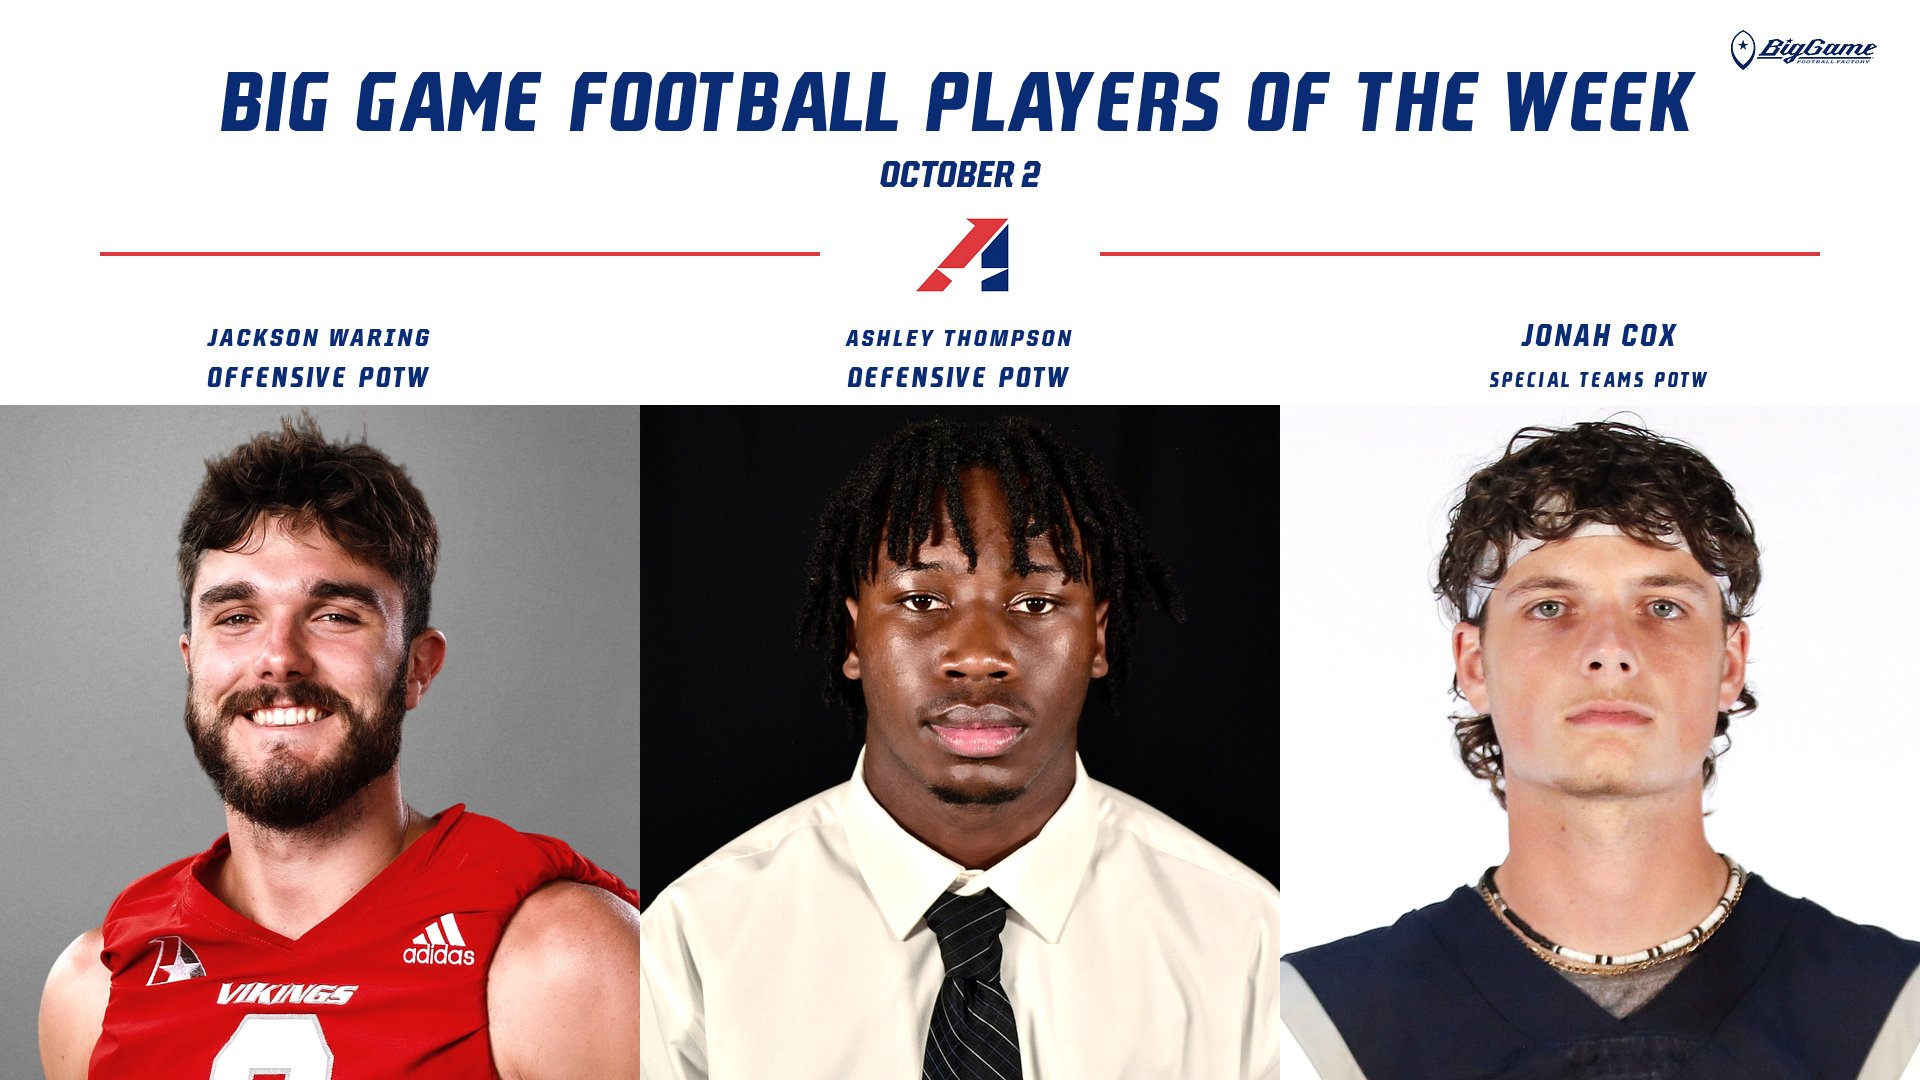 Big Game Football Players of the Week Announced